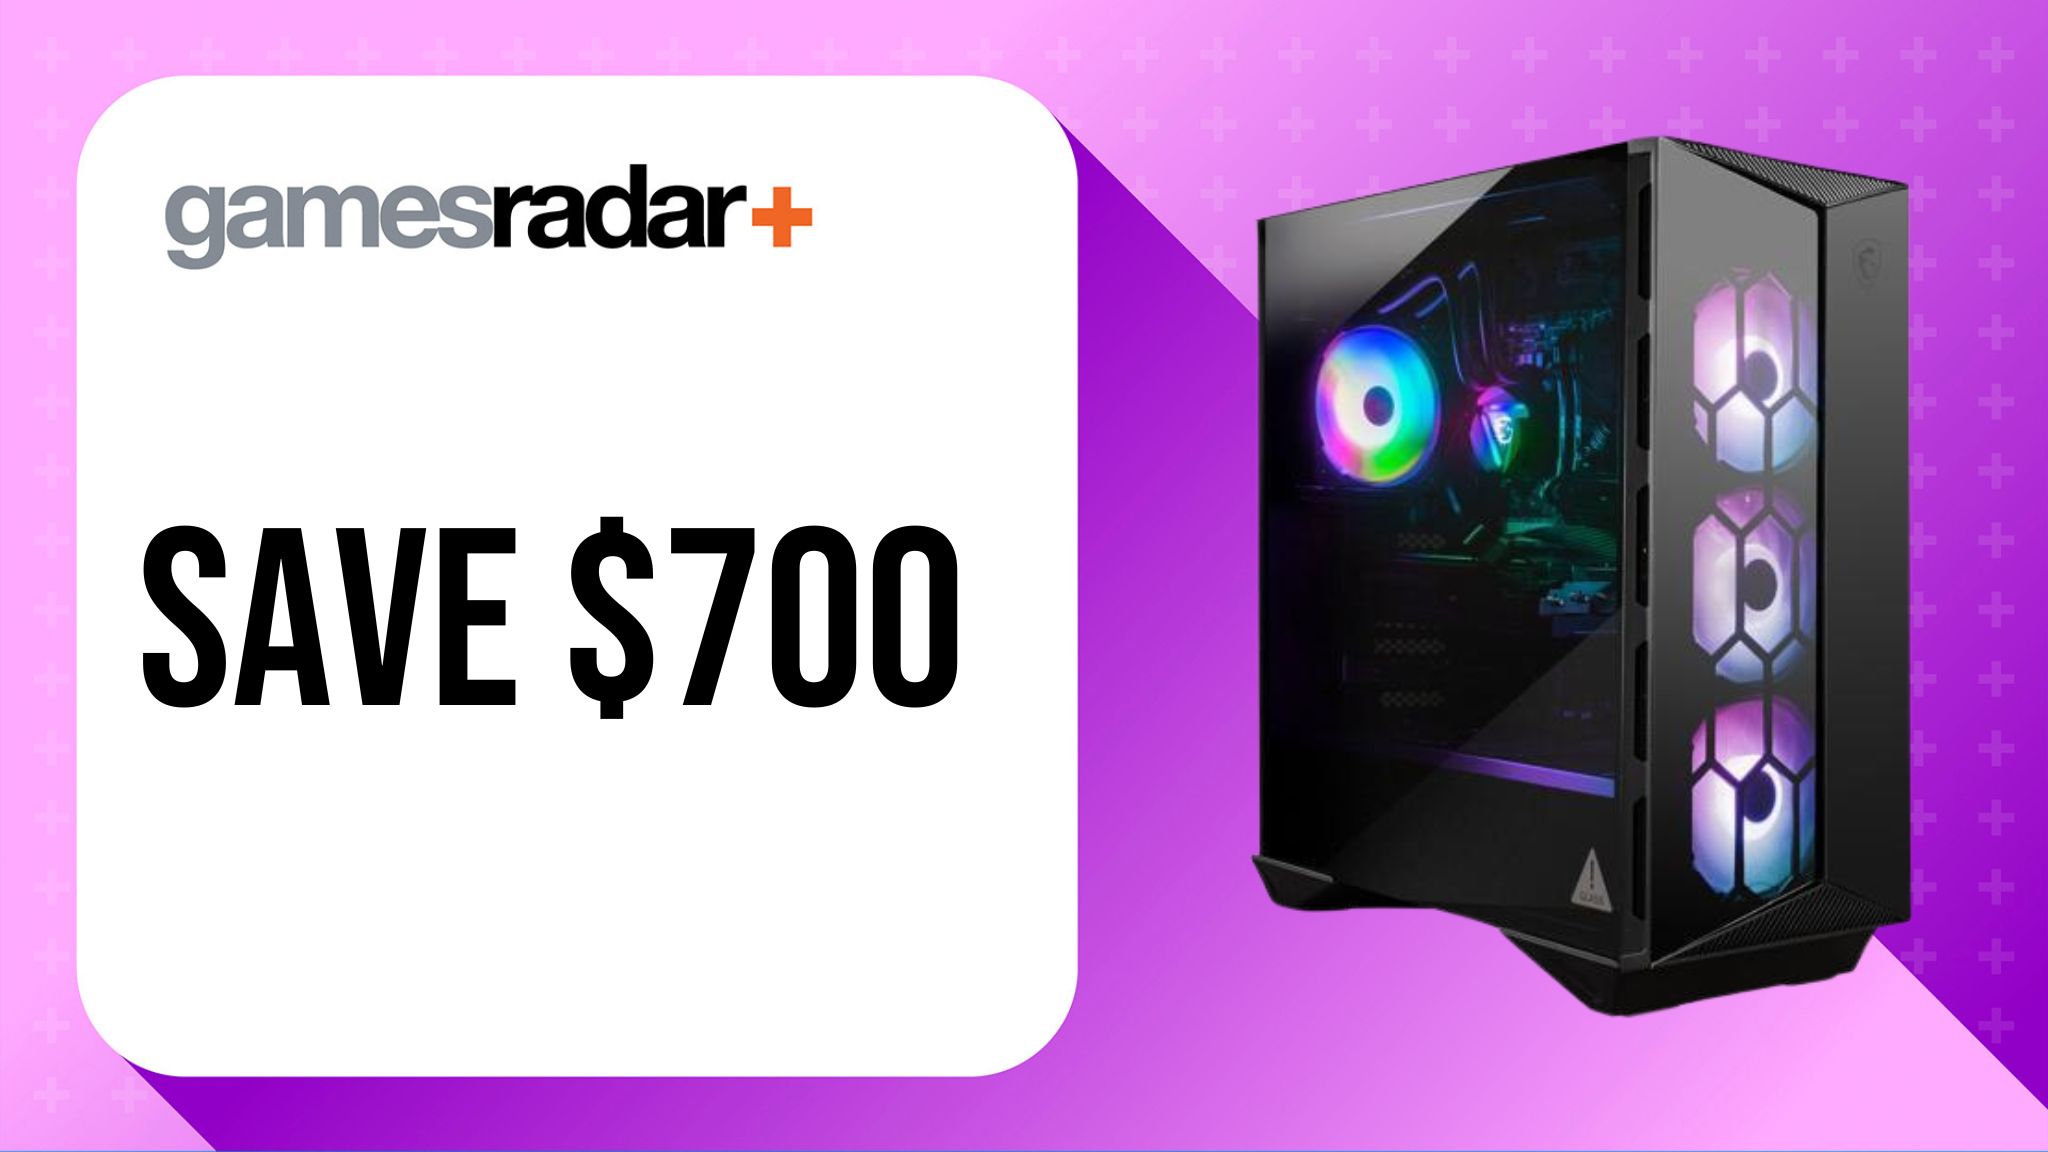 MSI Aegis R deal image saving $700 with purple background